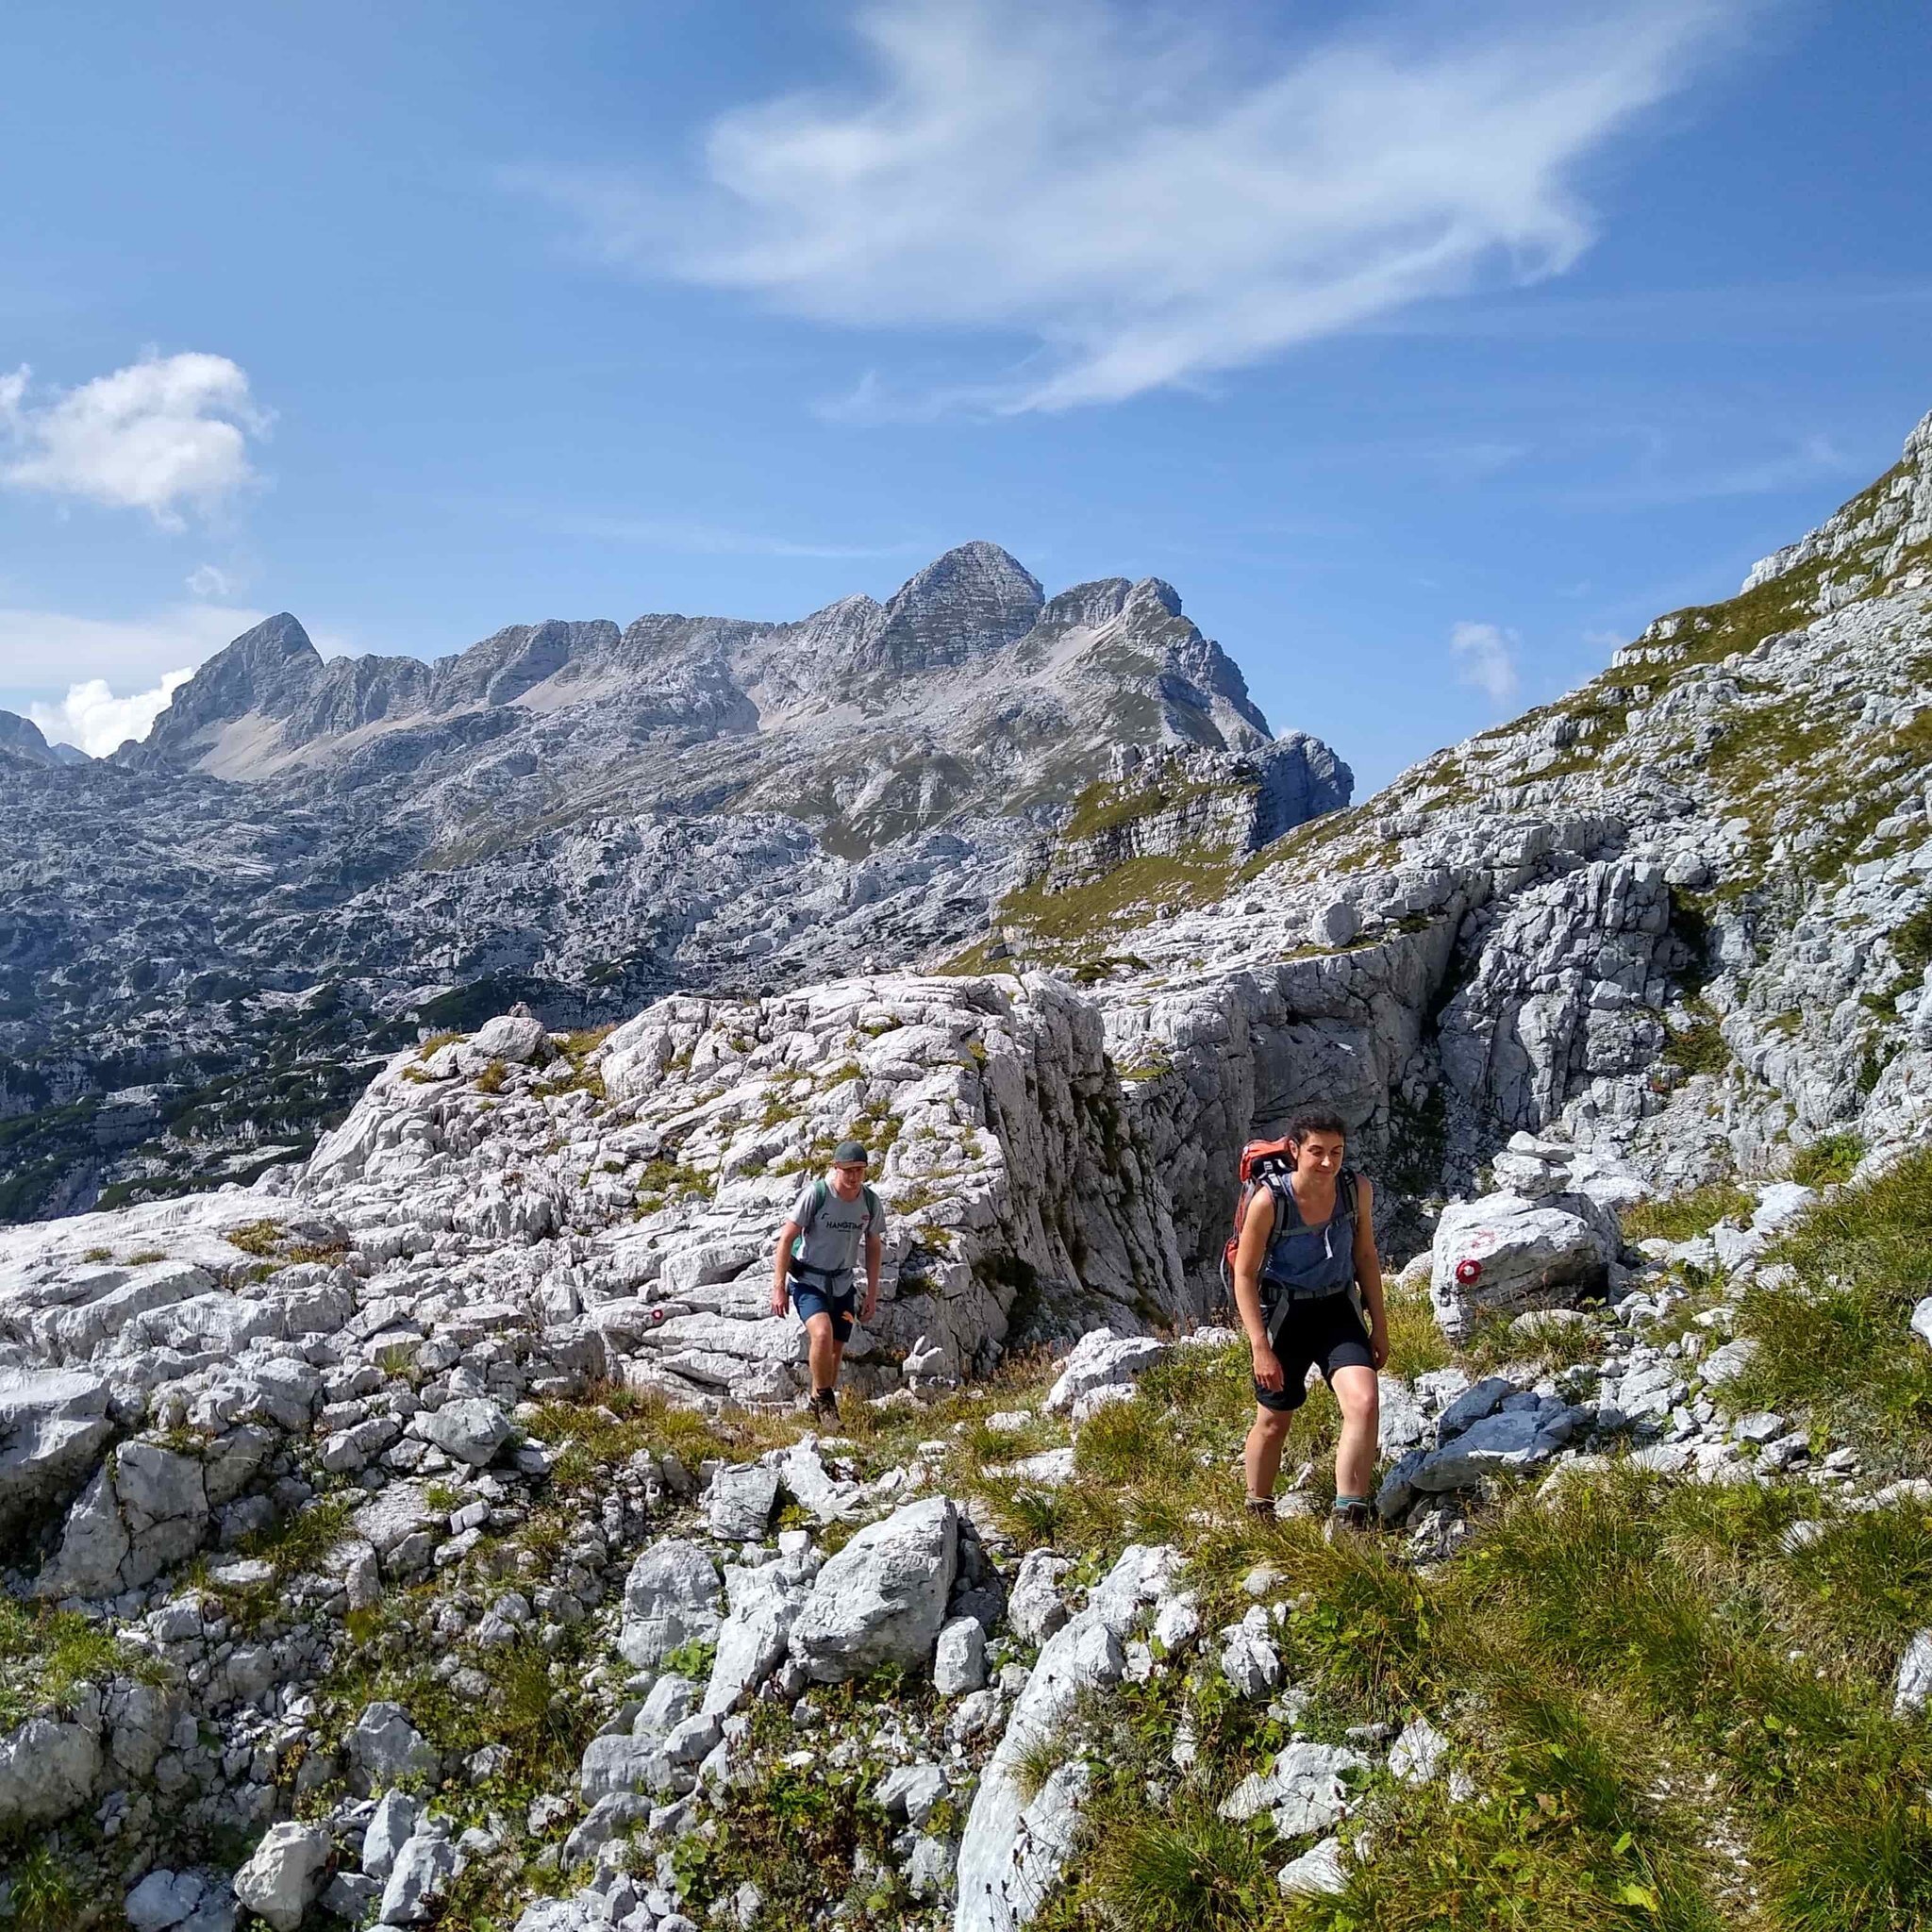 The Julian Alps of Slovenia are perfect for those looking for a quieter, but no less spectacular, corner of the Alps. Dramatic limestone peaks rise steeply above sparkling lakes and wildflower meadows - topped off by Triglav (2,864m), the highest mou